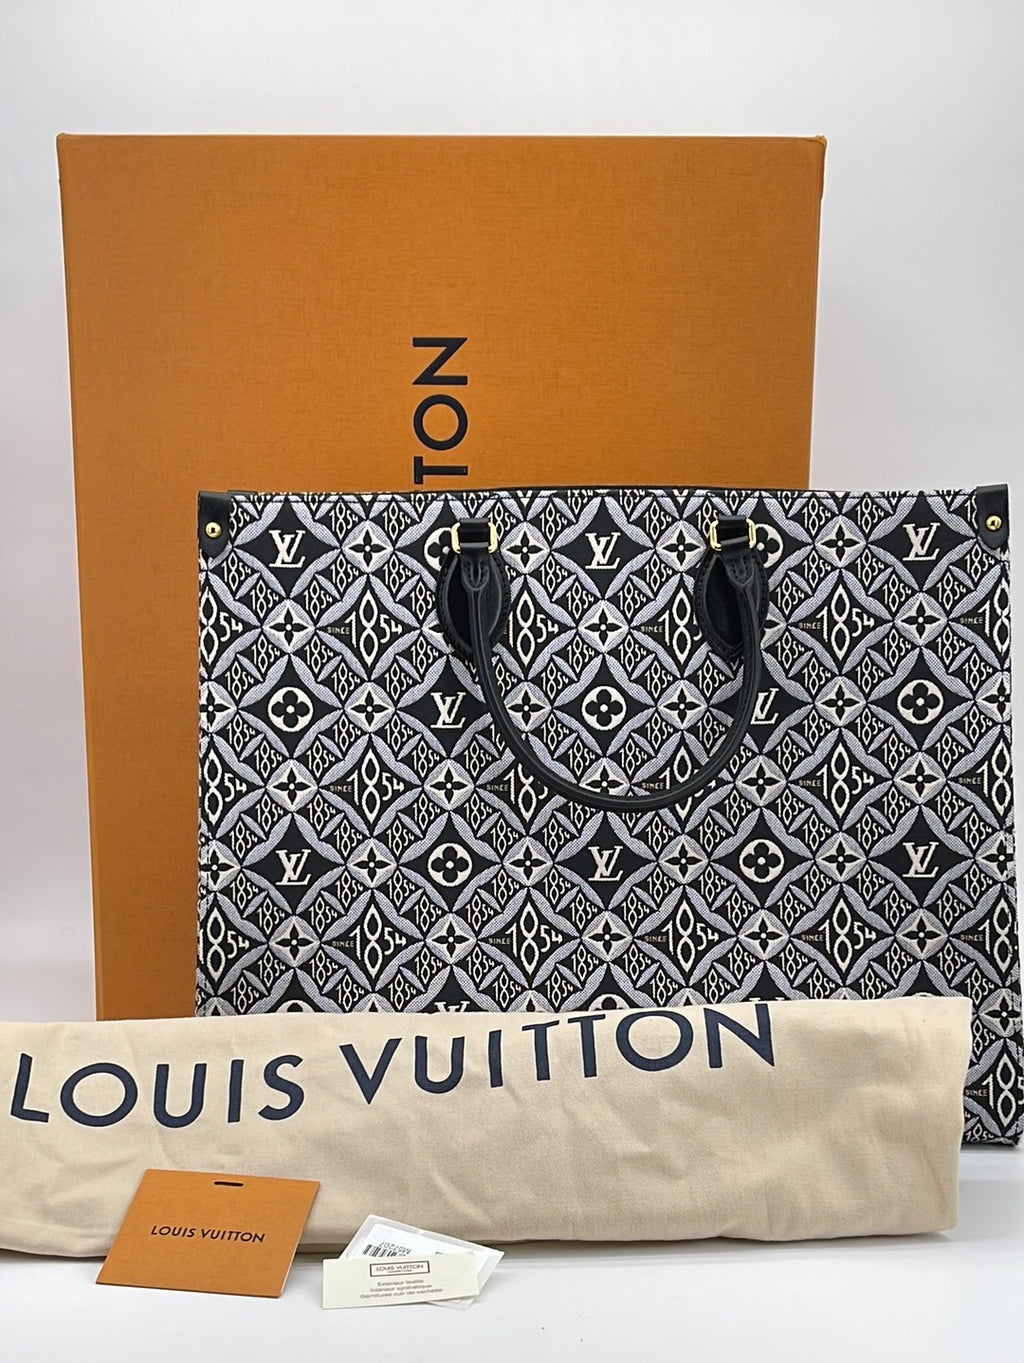 LIMITED EDITION Louis Vuitton Urs Fischer Onthego GM Tote FN4220 05182 –  KimmieBBags LLC